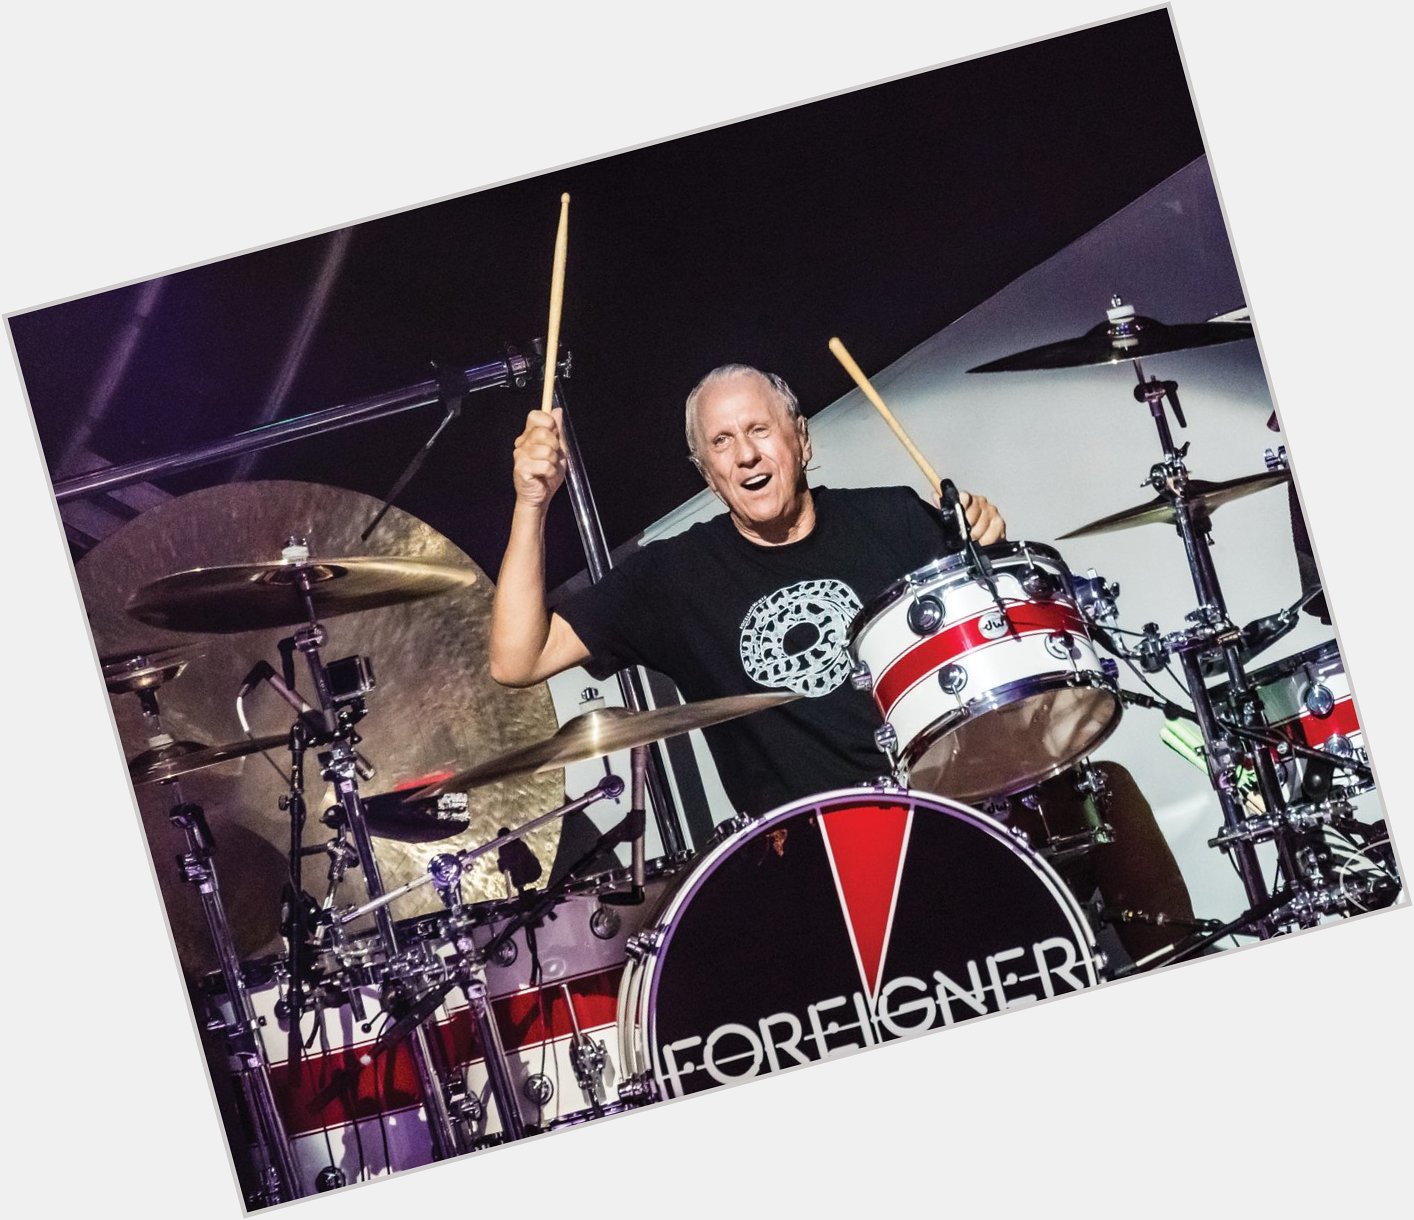 Today we wish a happy birthday to Dennis Elliott.

Dennis was the original drummer for the rock band, Foreigner.  